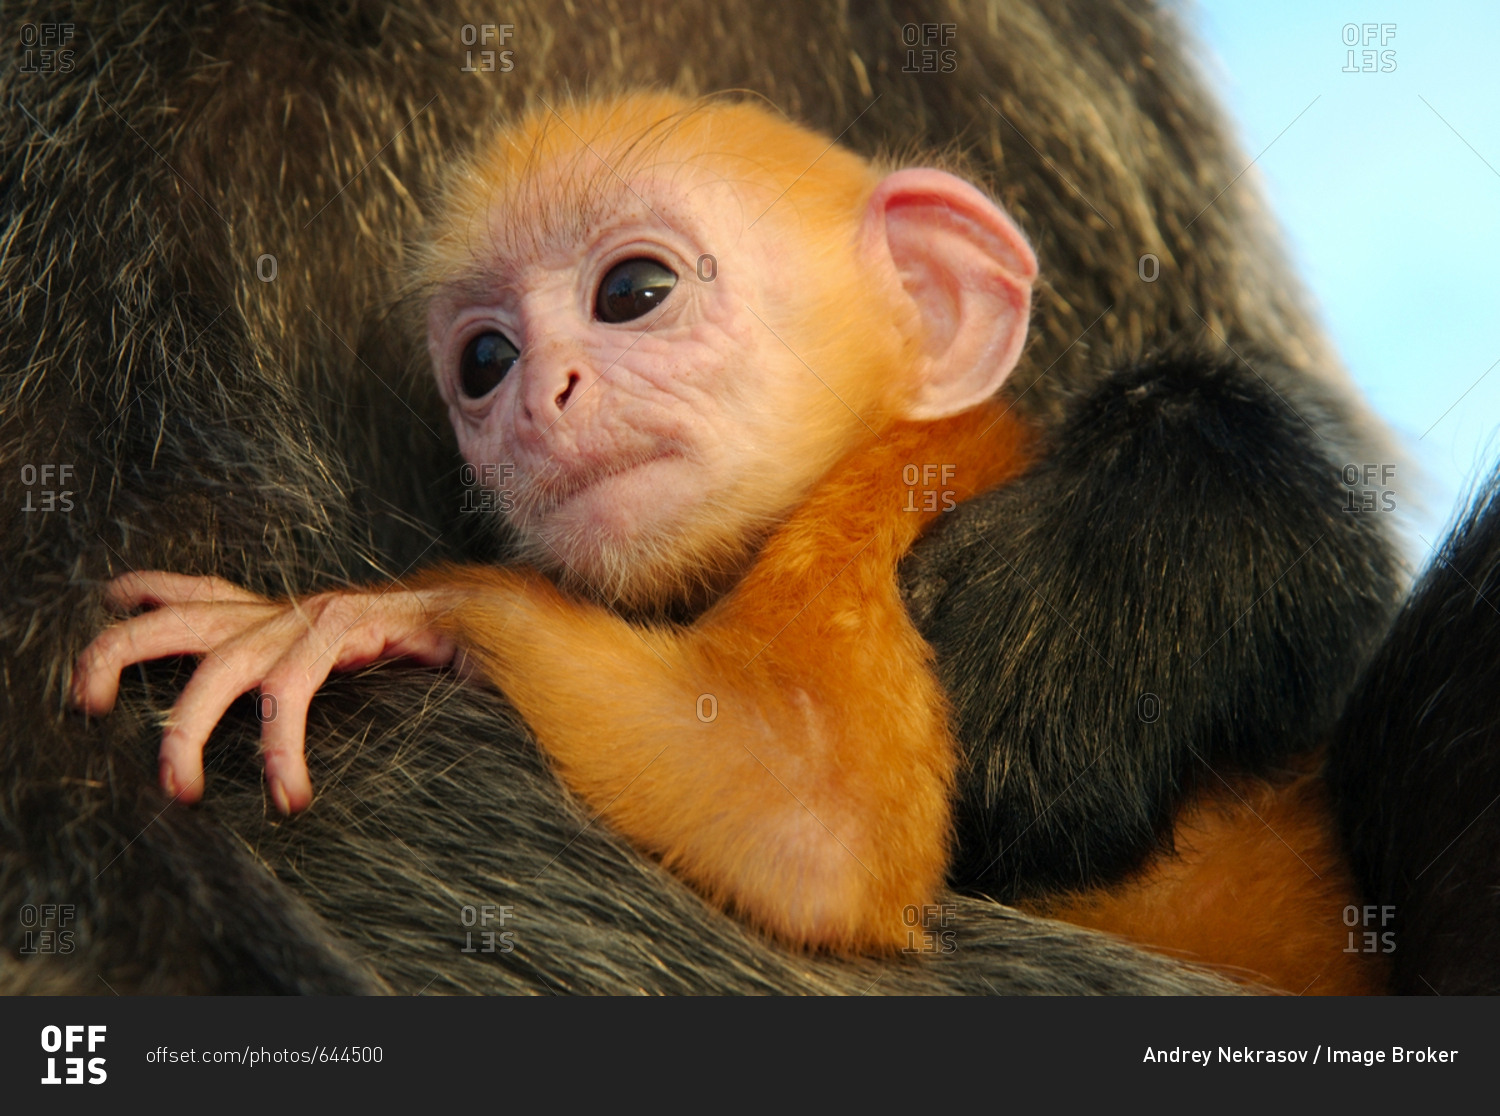 Silvered Leaf Monkey, Silver Langur (Presbytis cristata), baby in the arms of its mother, Malaysia, Southeast Asia, Asia